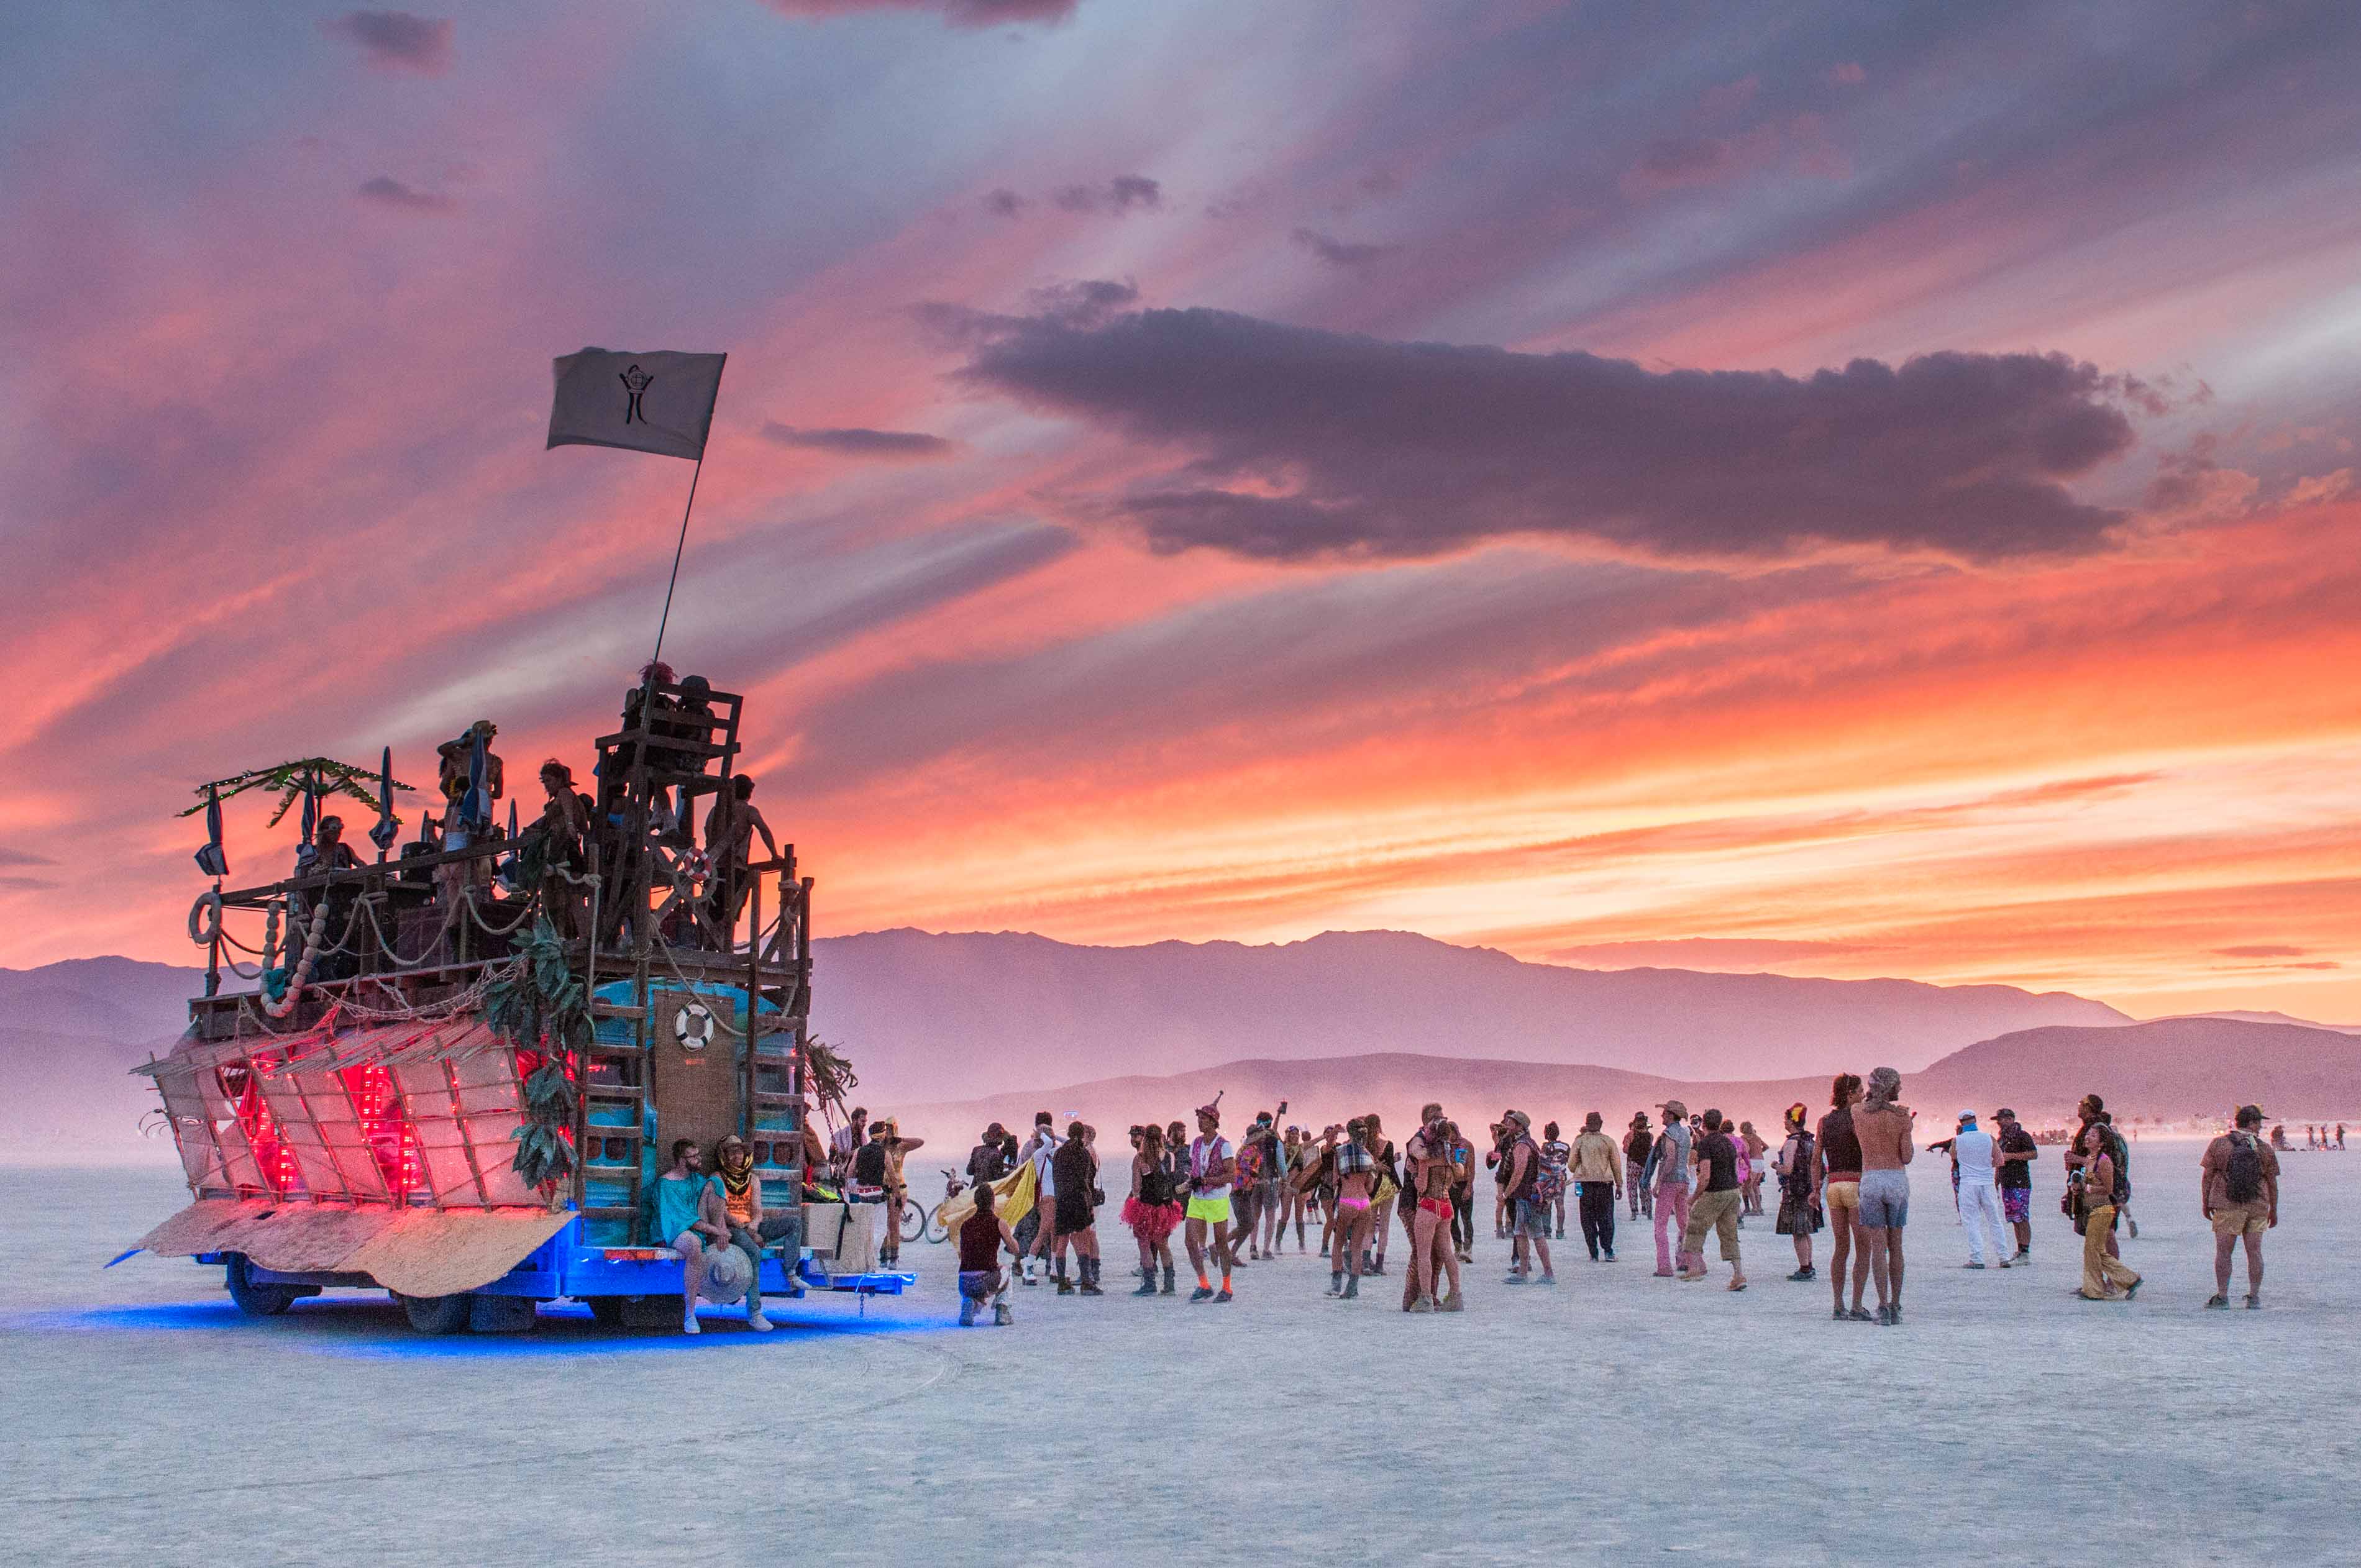 As the sun sets over Burning Man, an art car stands tall over attendees dow...